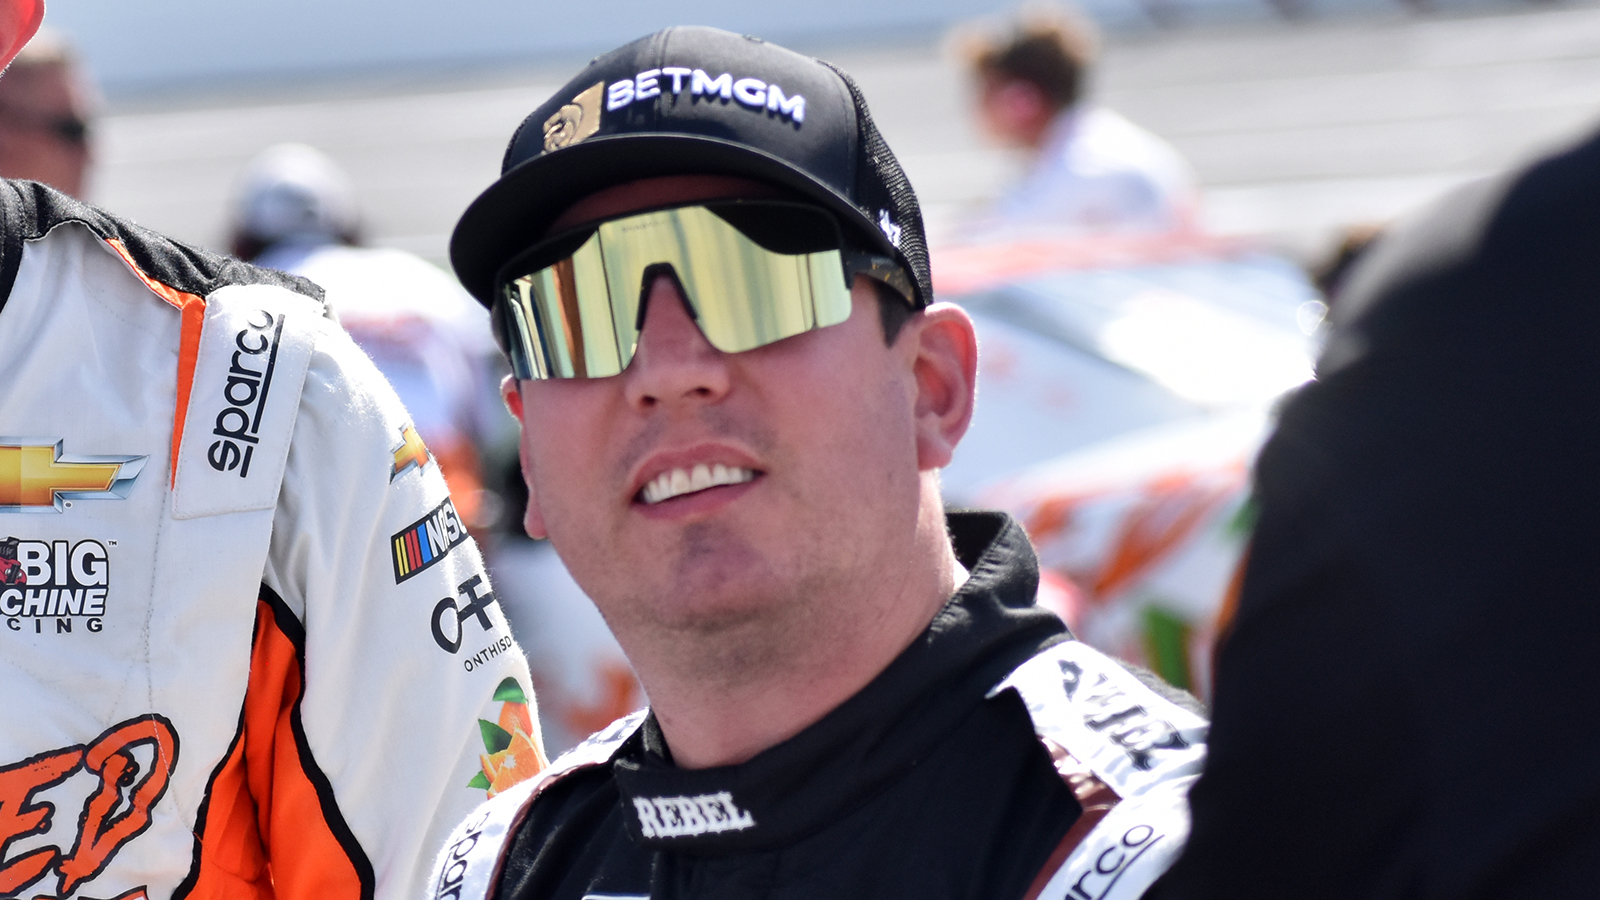 Kyle Busch 2025 plans will Kyle Busch leave RCR for Spire Motorsports in 2025?